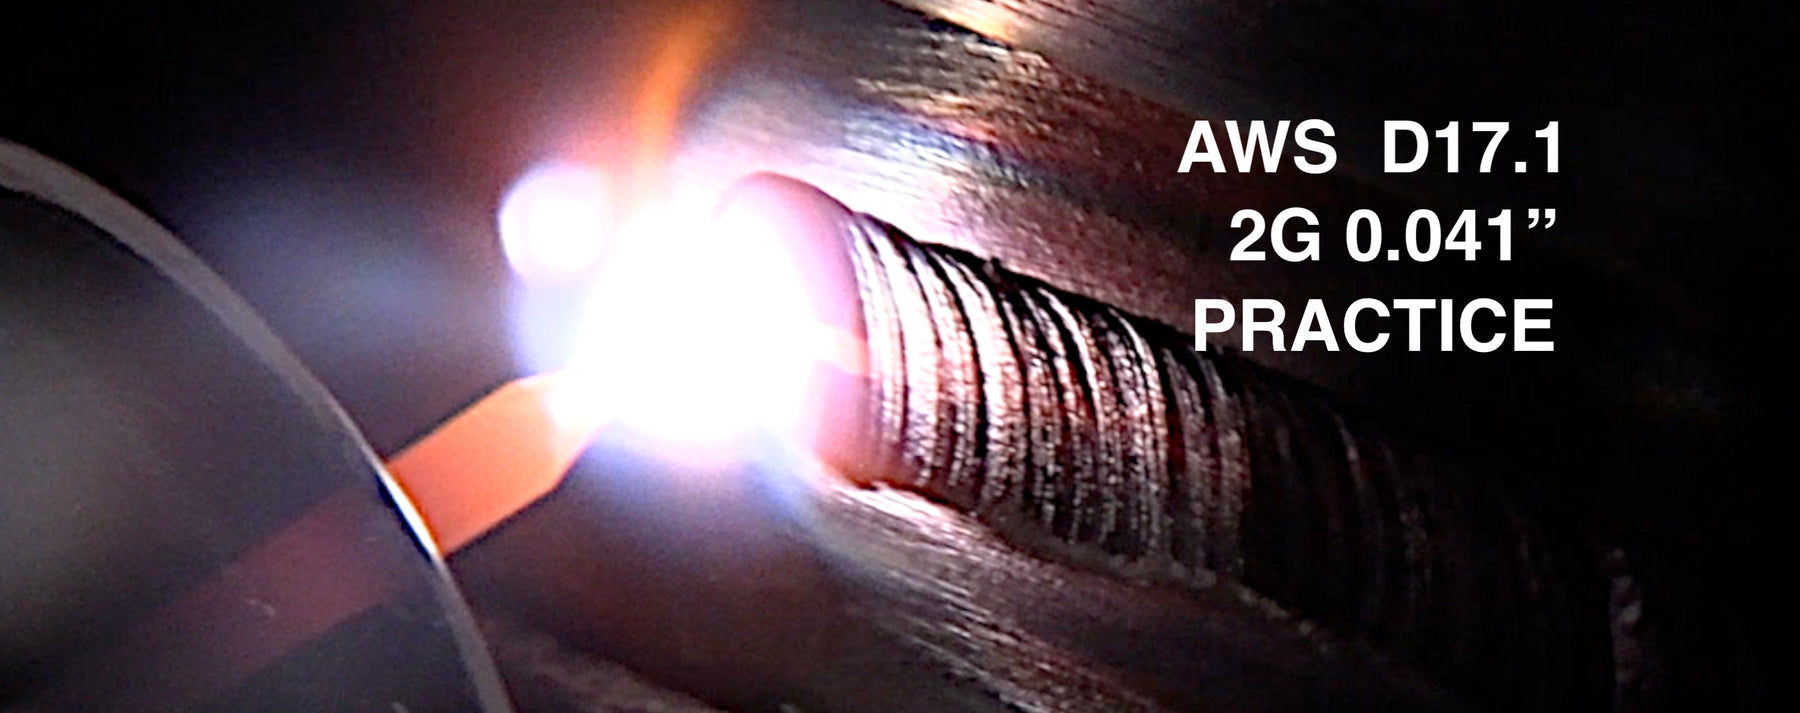 2g tig test aws d17.1 carbon and low alloy steel group 1